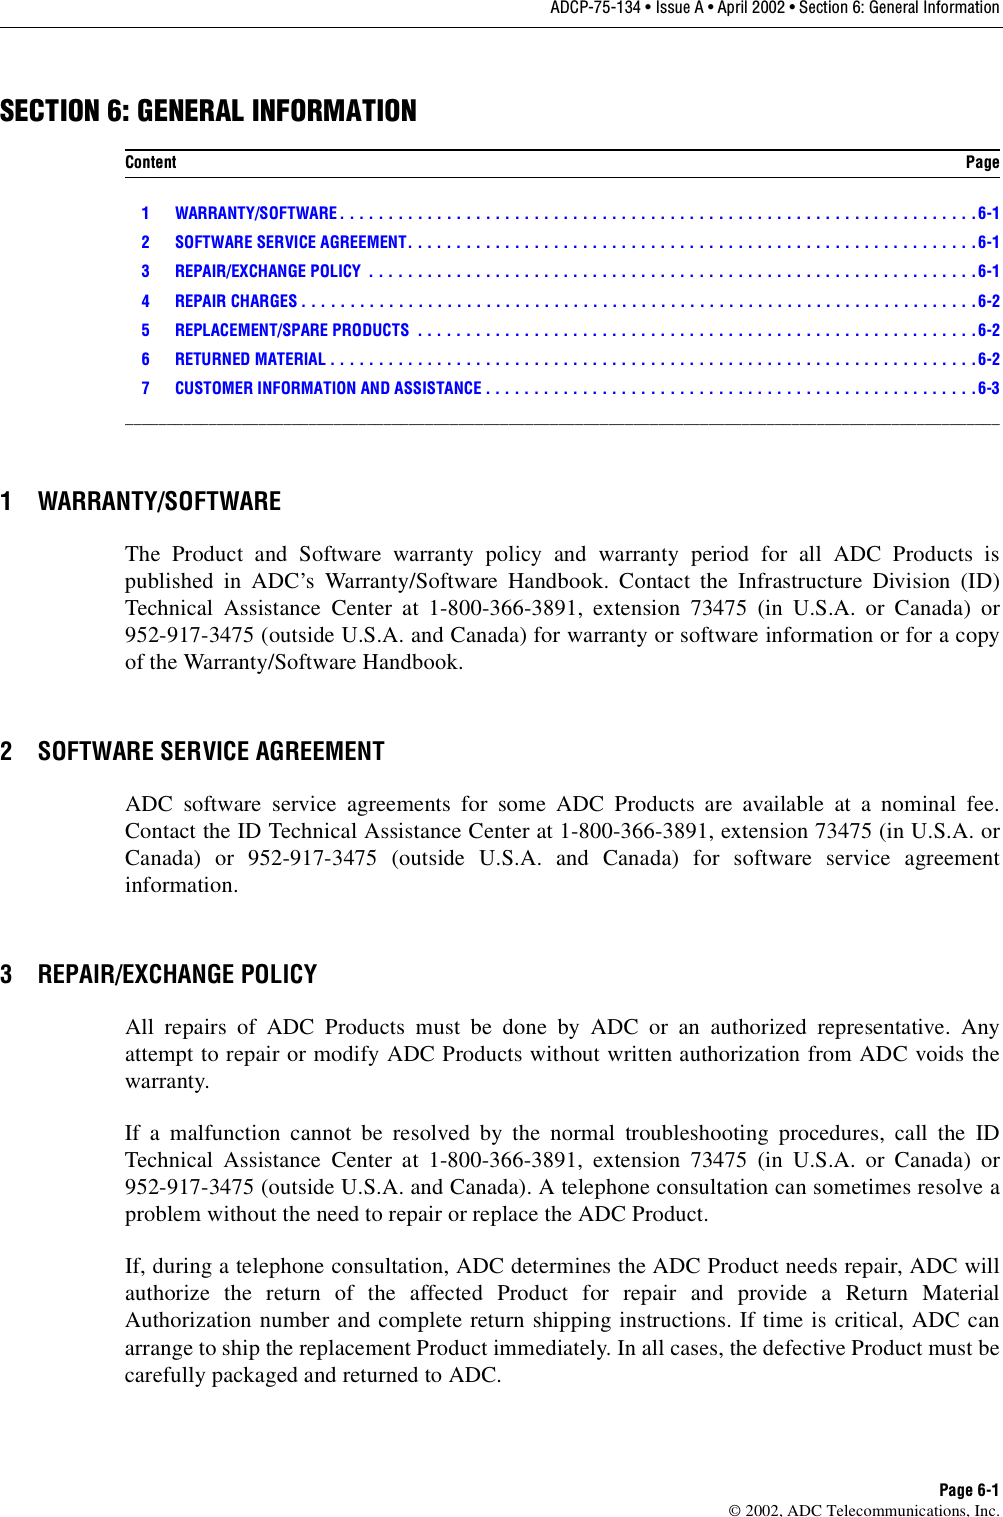 ADCP-75-134 • Issue A • April 2002 • Section 6: General InformationPage 6-1©2002, ADC Telecommunications, Inc.SECTION 6: GENERAL INFORMATION1 WARRANTY/SOFTWARE . . . . . . . . . . . . . . . . . . . . . . . . . . . . . . . . . . . . . . . . . . . . . . . . . . . . . . . . . . . . . . . . . .6-12 SOFTWARE SERVICE AGREEMENT. . . . . . . . . . . . . . . . . . . . . . . . . . . . . . . . . . . . . . . . . . . . . . . . . . . . . . . . . . .6-13 REPAIR/EXCHANGE POLICY  . . . . . . . . . . . . . . . . . . . . . . . . . . . . . . . . . . . . . . . . . . . . . . . . . . . . . . . . . . . . . . .6-14 REPAIR CHARGES . . . . . . . . . . . . . . . . . . . . . . . . . . . . . . . . . . . . . . . . . . . . . . . . . . . . . . . . . . . . . . . . . . . . . .6-25 REPLACEMENT/SPARE PRODUCTS  . . . . . . . . . . . . . . . . . . . . . . . . . . . . . . . . . . . . . . . . . . . . . . . . . . . . . . . . . .6-26 RETURNED MATERIAL . . . . . . . . . . . . . . . . . . . . . . . . . . . . . . . . . . . . . . . . . . . . . . . . . . . . . . . . . . . . . . . . . . . 6-27 CUSTOMER INFORMATION AND ASSISTANCE . . . . . . . . . . . . . . . . . . . . . . . . . . . . . . . . . . . . . . . . . . . . . . . . . . .6-3_________________________________________________________________________________________________________1 WARRANTY/SOFTWAREThe Product and Software warranty policy and warranty period for all ADC Products ispublished in ADC’s Warranty/Software Handbook. Contact the Infrastructure Division (ID)Technical Assistance Center at 1-800-366-3891, extension 73475 (in U.S.A. or Canada) or952-917-3475 (outside U.S.A. and Canada) for warranty or software information or for acopyof the Warranty/Software Handbook.2 SOFTWARE SERVICE AGREEMENTADC software service agreements for some ADC Products are available at anominal fee.Contact the ID Technical Assistance Center at 1-800-366-3891, extension 73475 (in U.S.A. orCanada) or 952-917-3475 (outside U.S.A. and Canada) for software service agreementinformation.3 REPAIR/EXCHANGE POLICYAll repairs of ADC Products must be done by ADC or an authorized representative. Anyattempt to repair or modify ADC Products without written authorization from ADC voids thewarranty.If amalfunction cannot be resolved by the normal troubleshooting procedures, call the IDTechnical Assistance Center at 1-800-366-3891, extension 73475 (in U.S.A. or Canada) or952-917-3475 (outside U.S.A. and Canada). Atelephone consultation can sometimes resolve aproblem without the need to repair or replace the ADC Product.If, during atelephone consultation, ADC determines the ADC Product needs repair, ADC willauthorize the return of the affected Product for repair and provide aReturn MaterialAuthorization number and complete return shipping instructions. If time is critical, ADC canarrange to ship the replacement Product immediately. In all cases, the defective Product must becarefully packaged and returned to ADC.Content Page